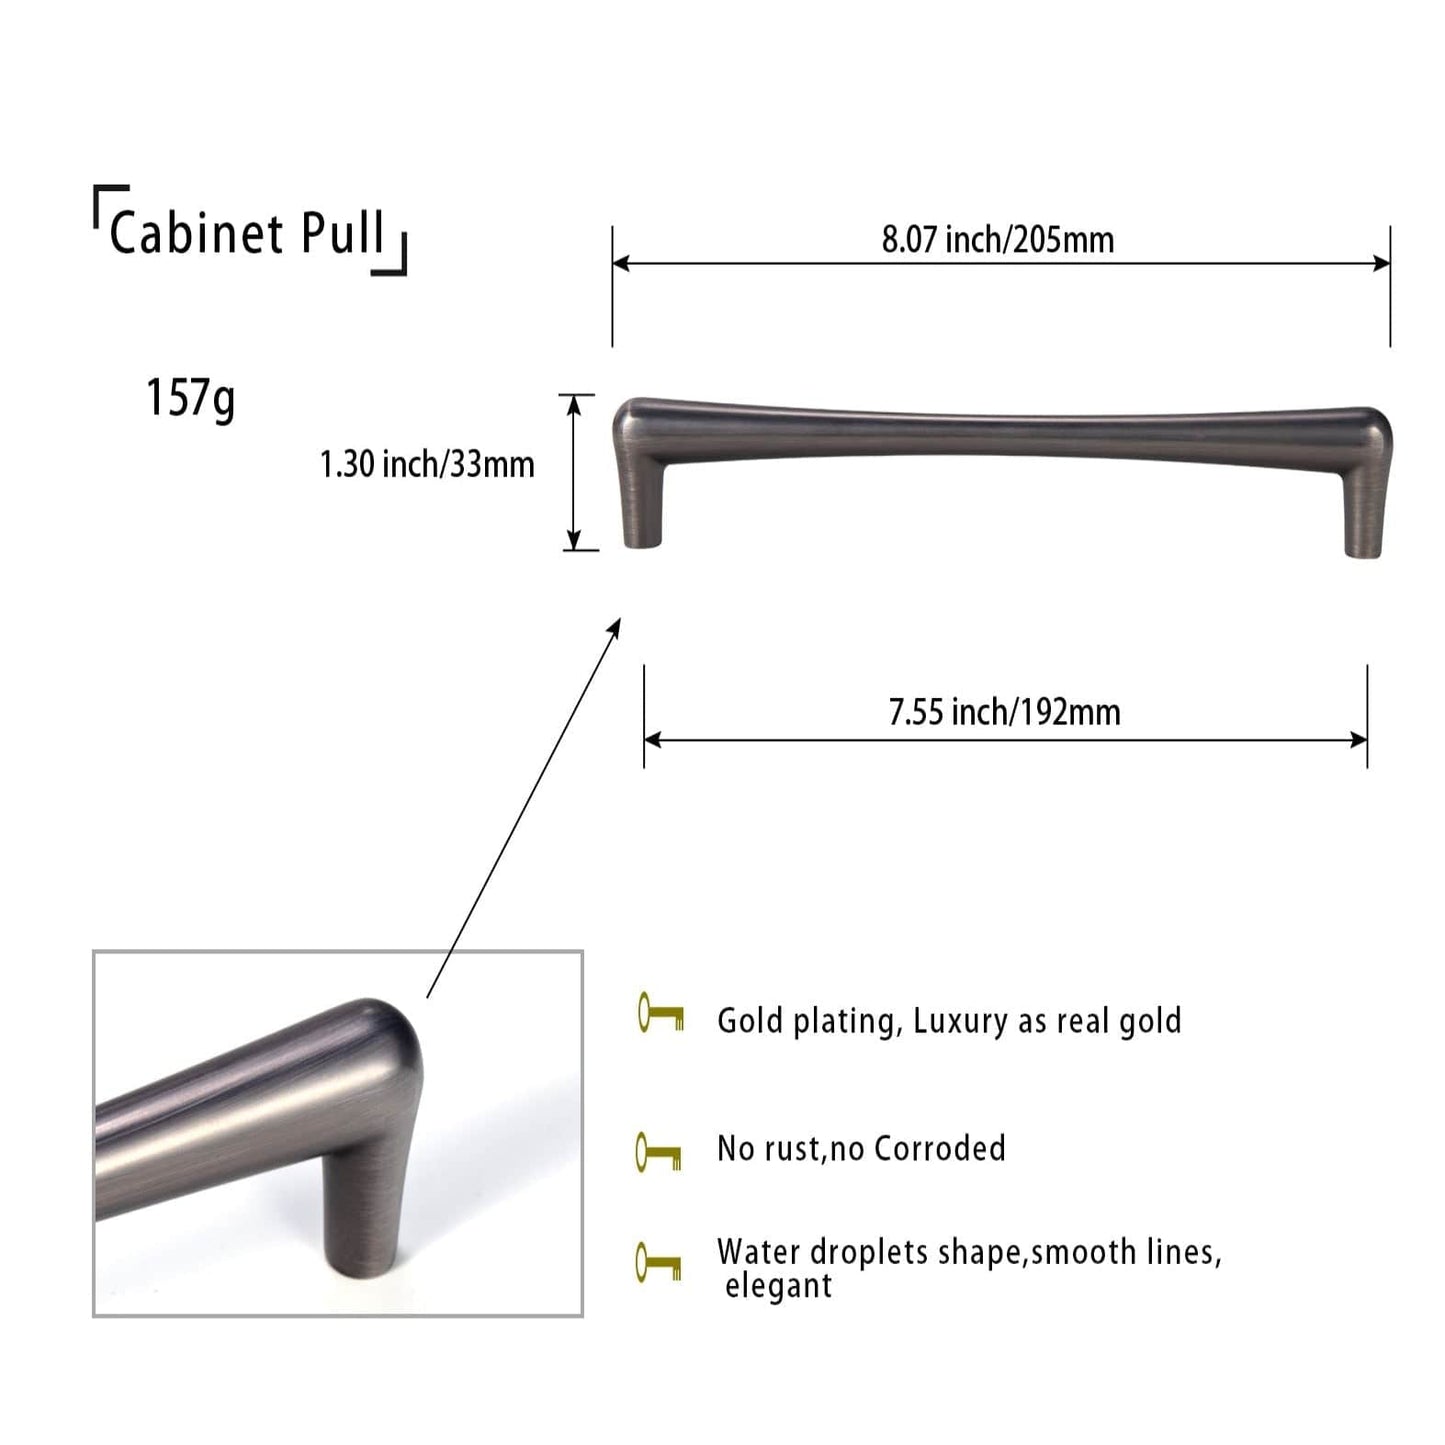 Modern Minimalist Style Drawer Pulls Affordable Luxury Cabinet Pulls 6 Pack